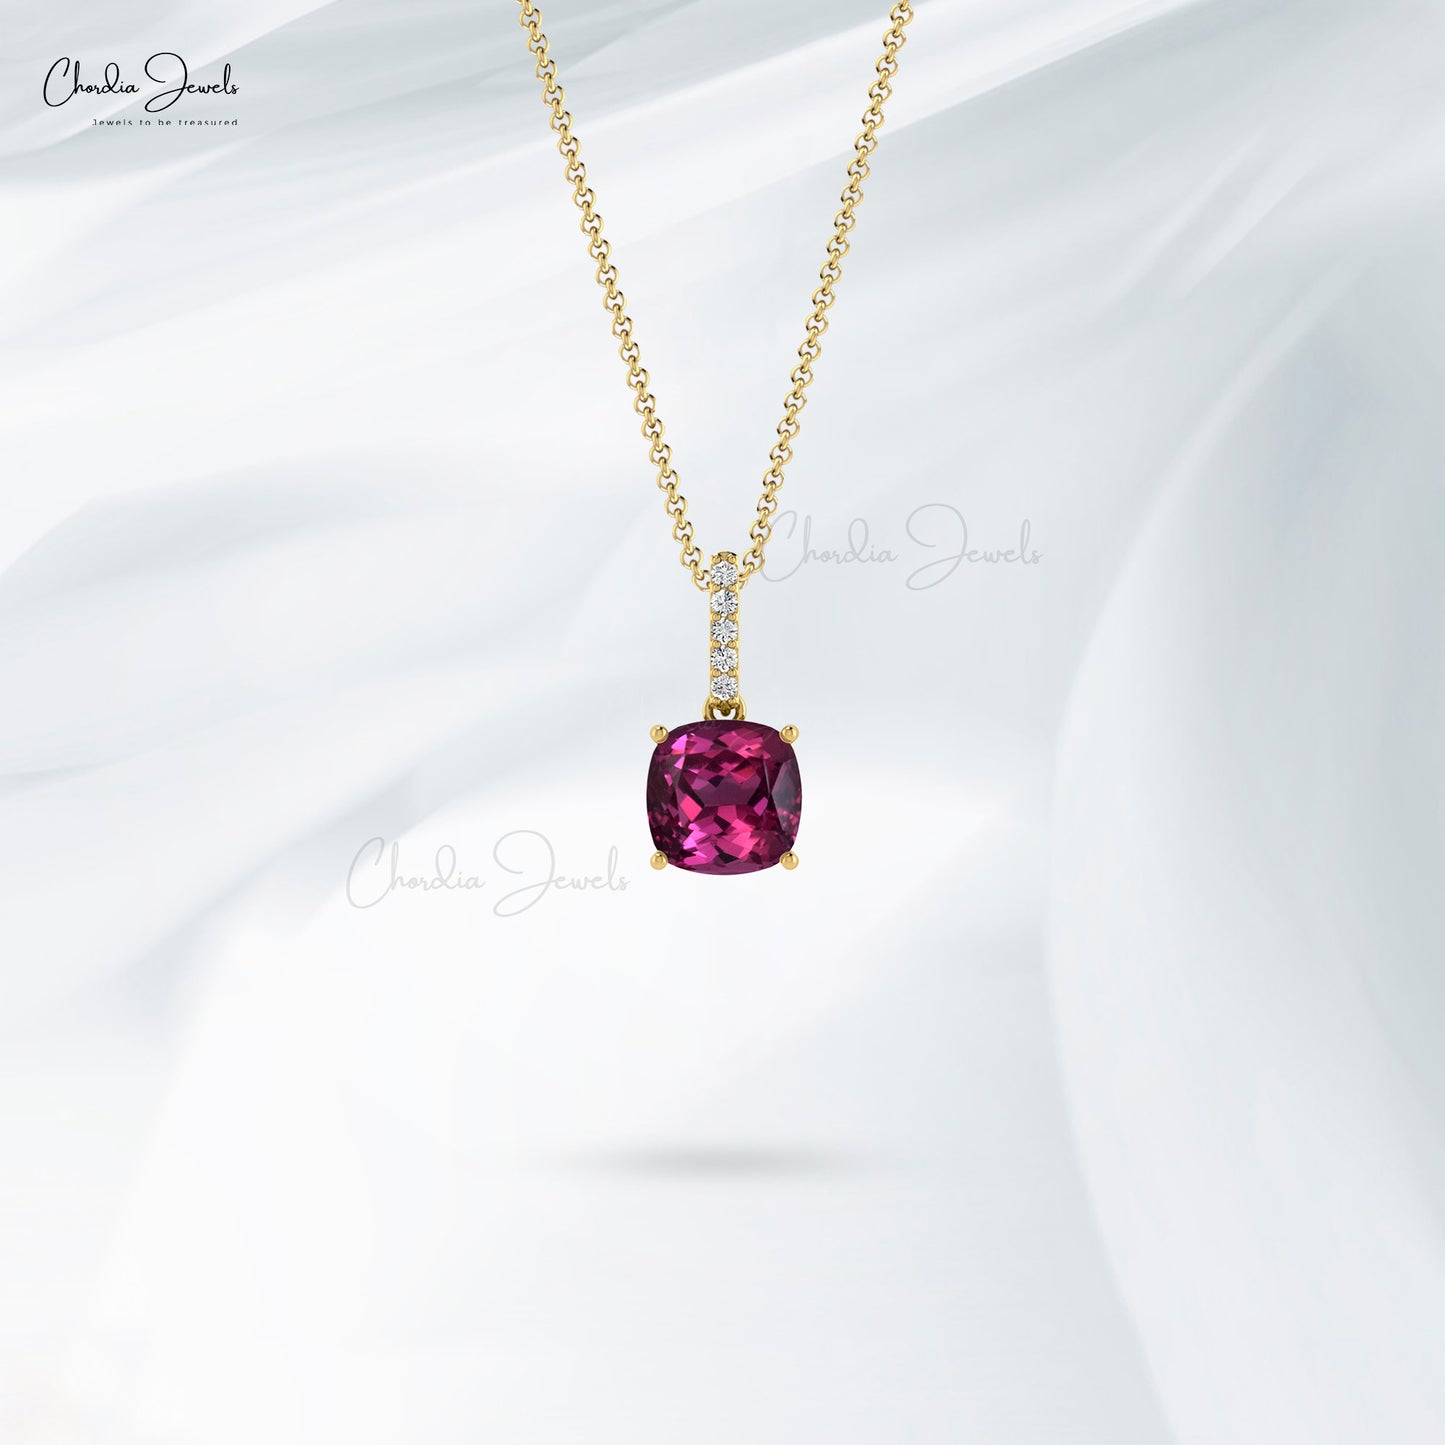 Load image into Gallery viewer, Fine Jewelry Rhodolite Garnet 14K Gold Pendant Necklace with I1-I2/G-H Diamonds
